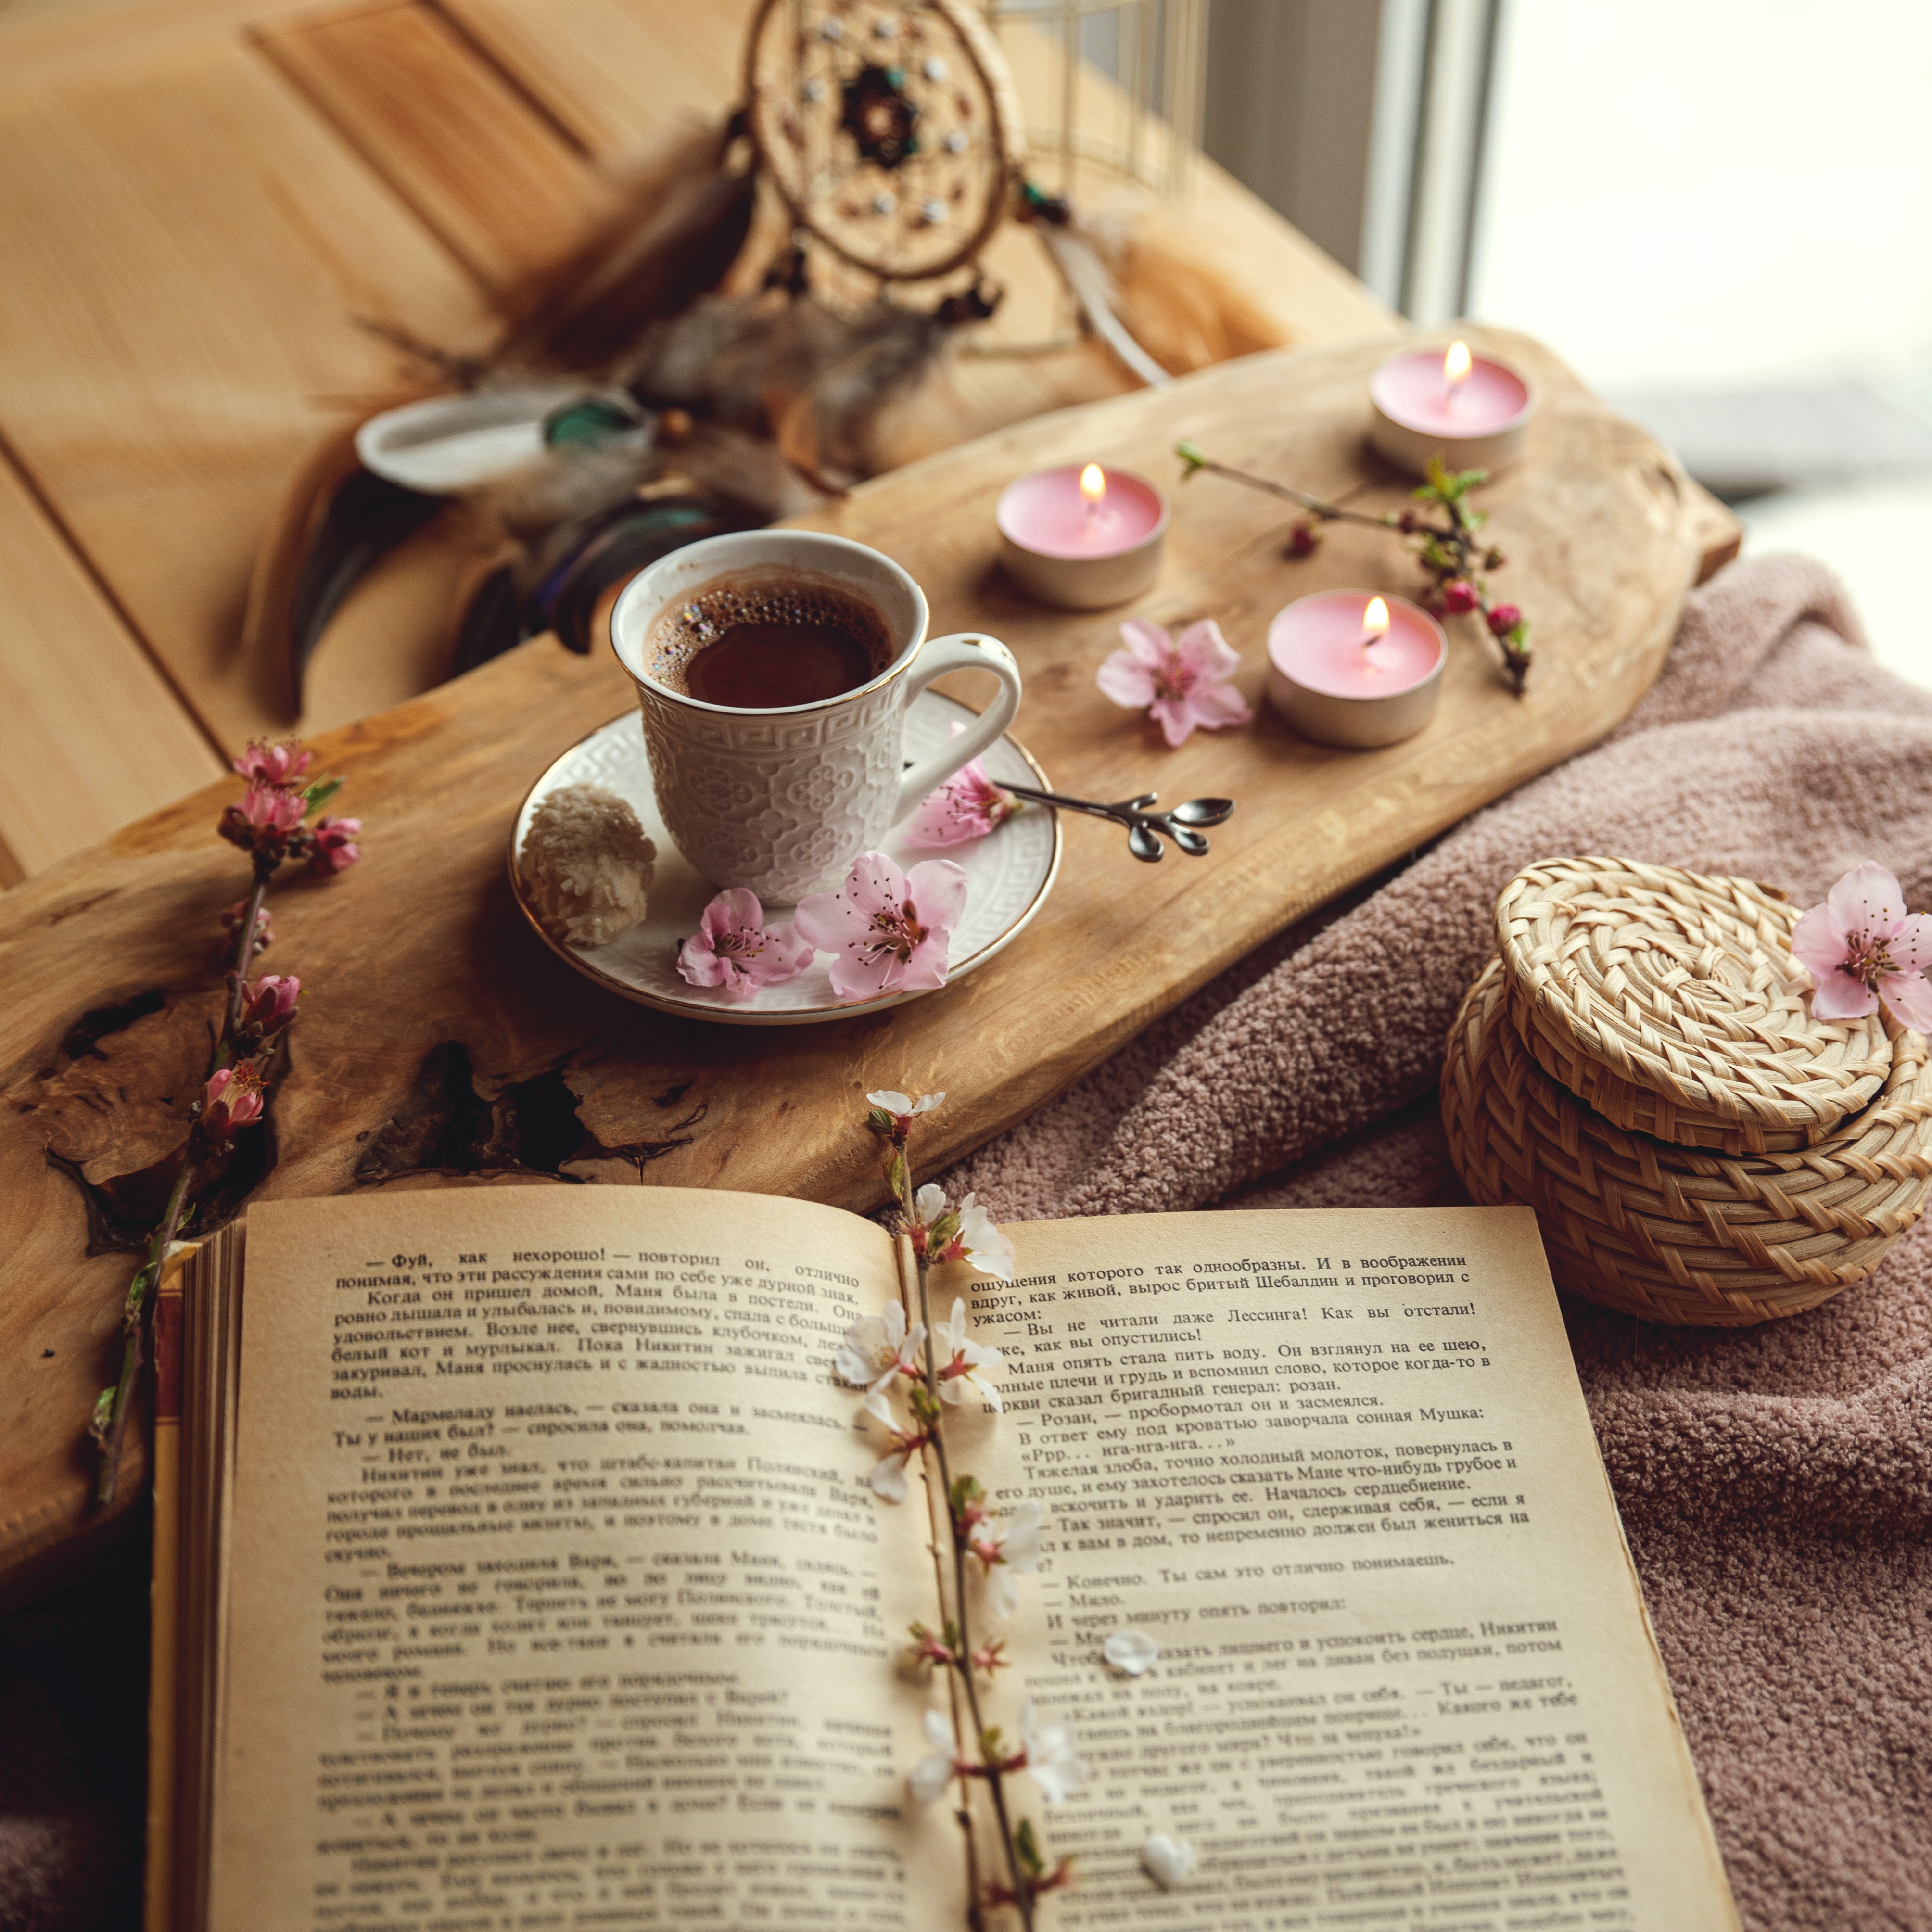 cup, beverage, candles, cocoa, food, flowers, book, drink